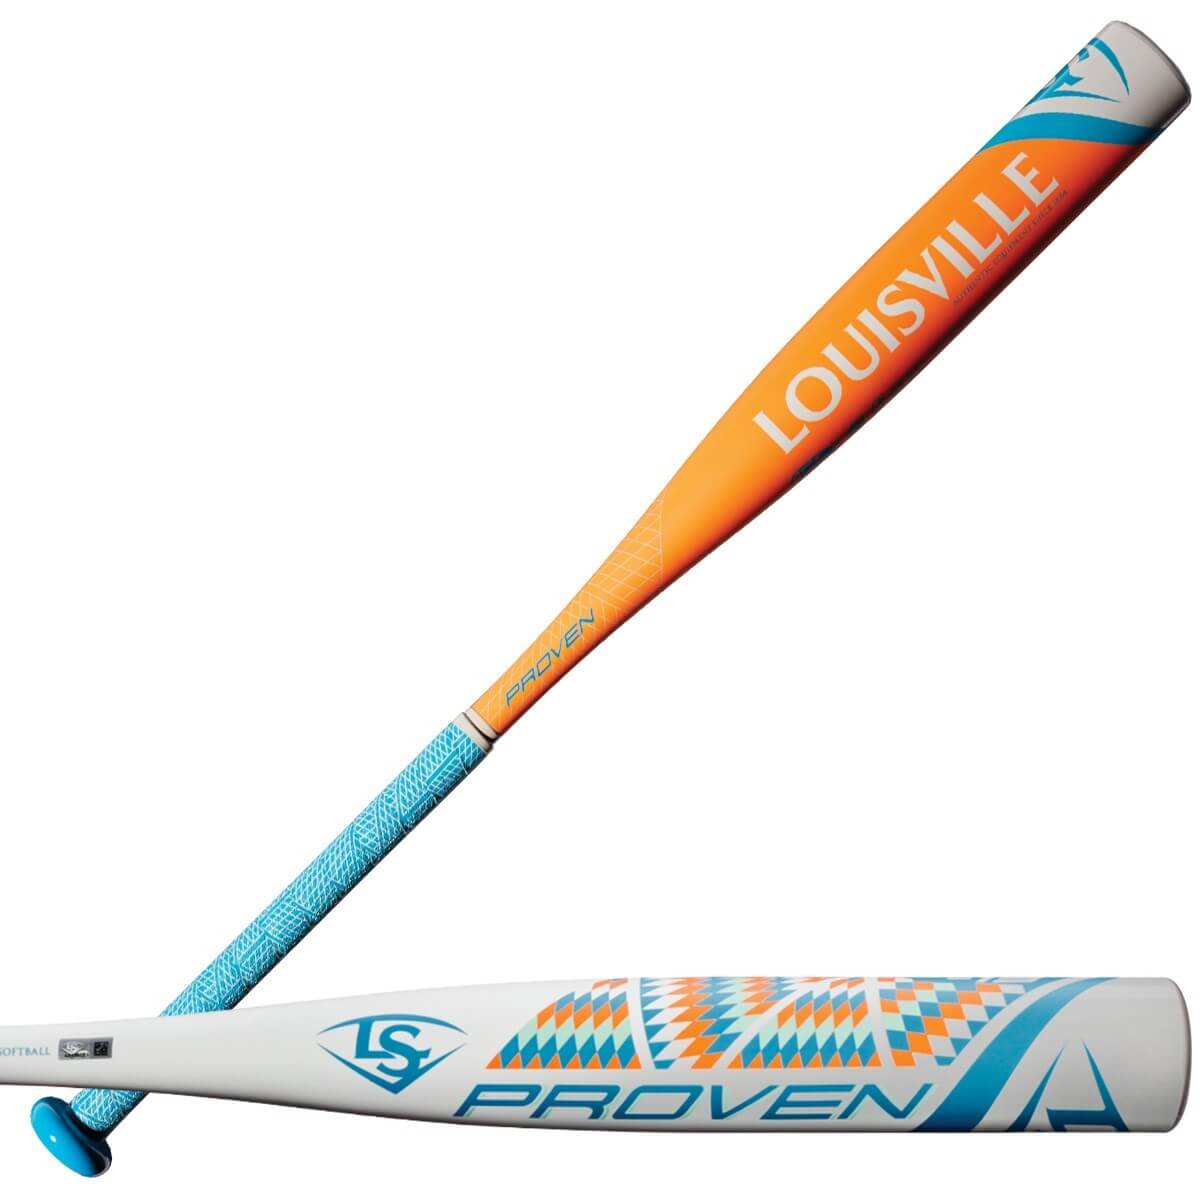 Best Fastpitch Softball Bats [New Guide] See Our Reviews!